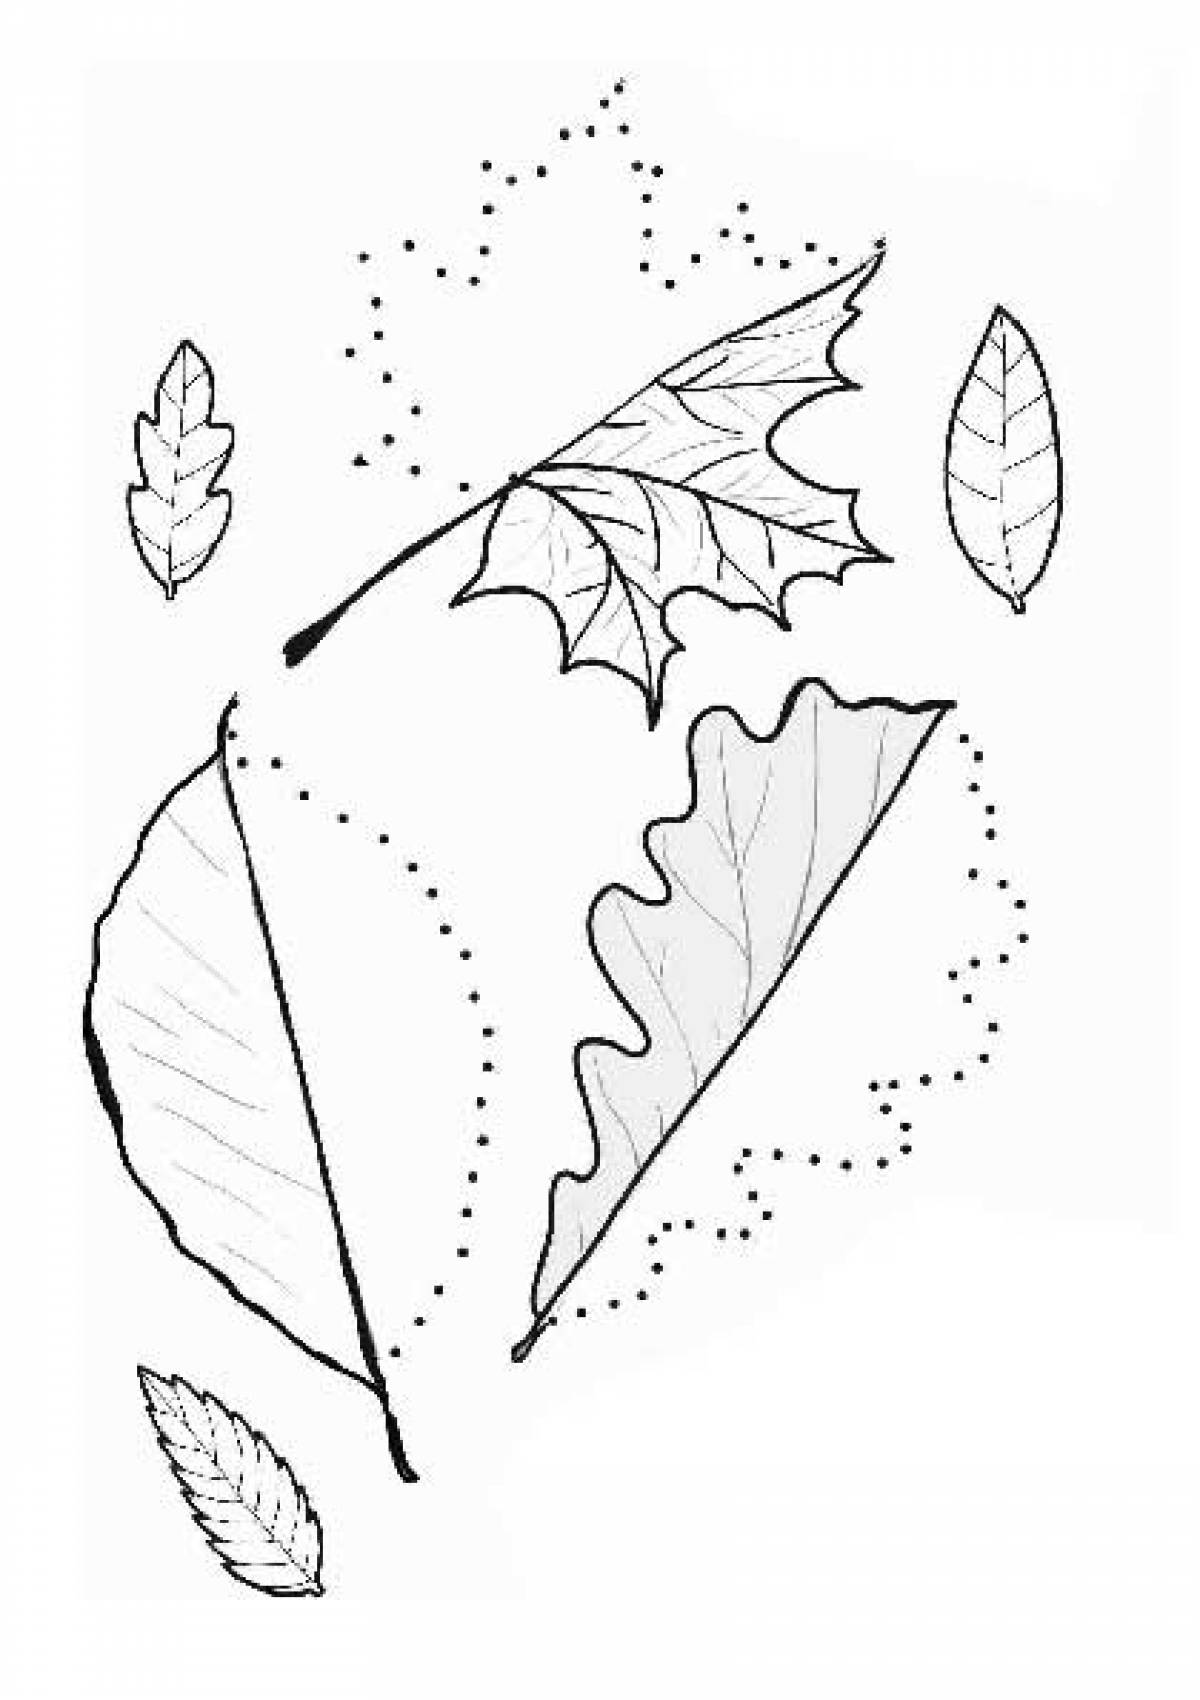 Leaves by dots